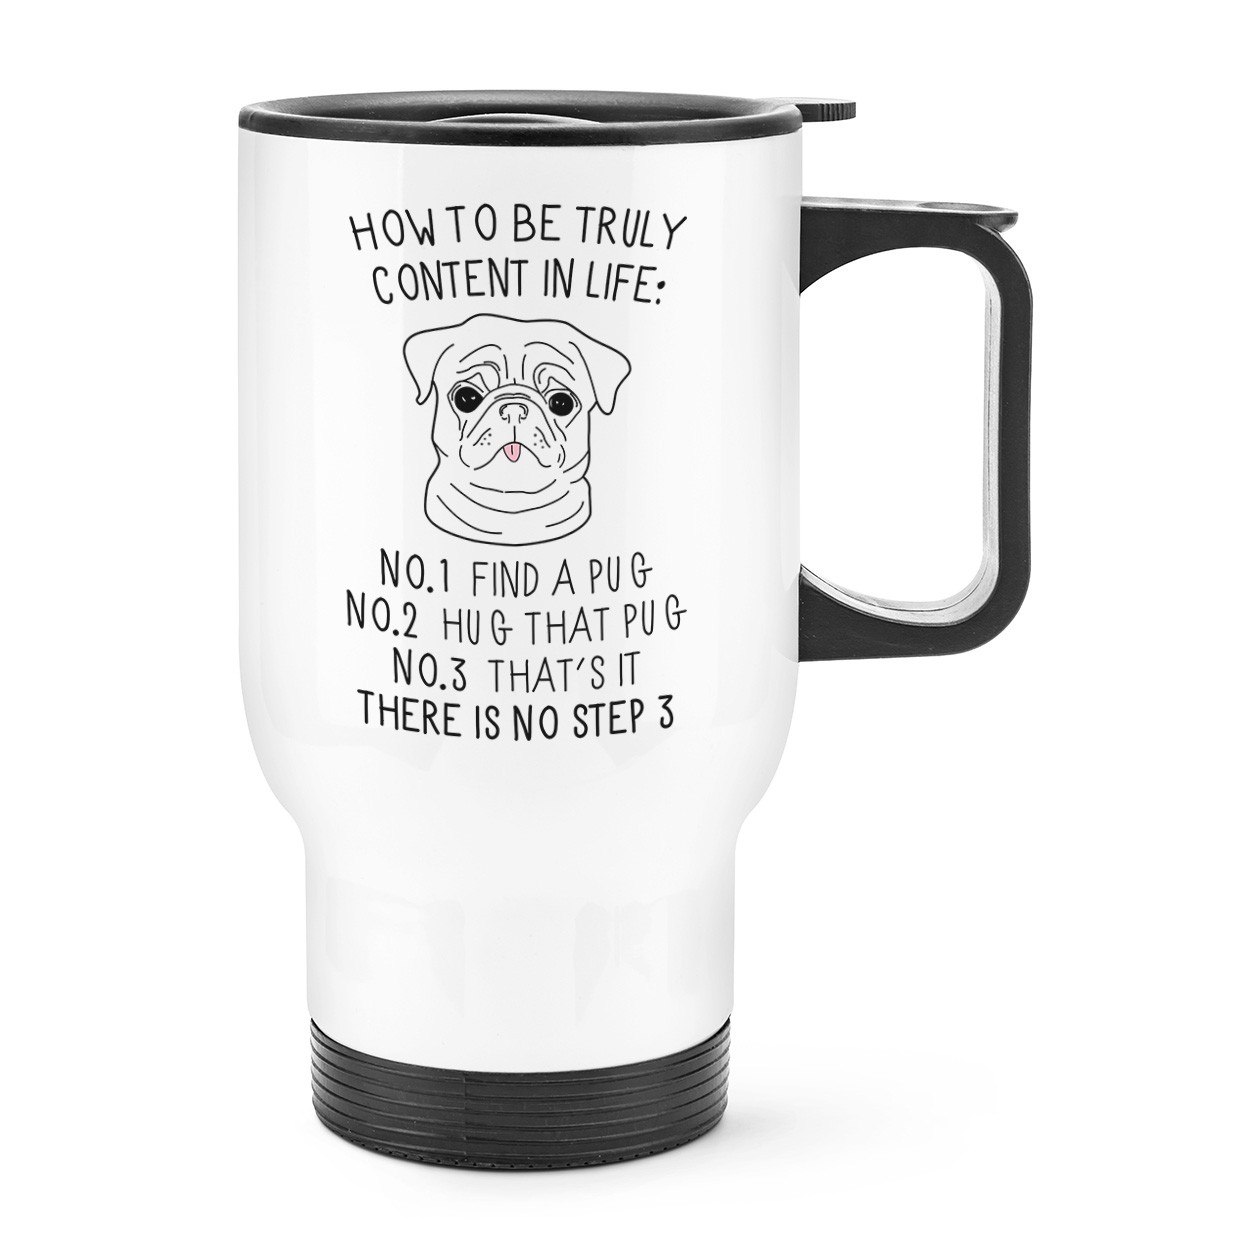 How To Be Truly Content In Life Pug Travel Mug Cup With Handle